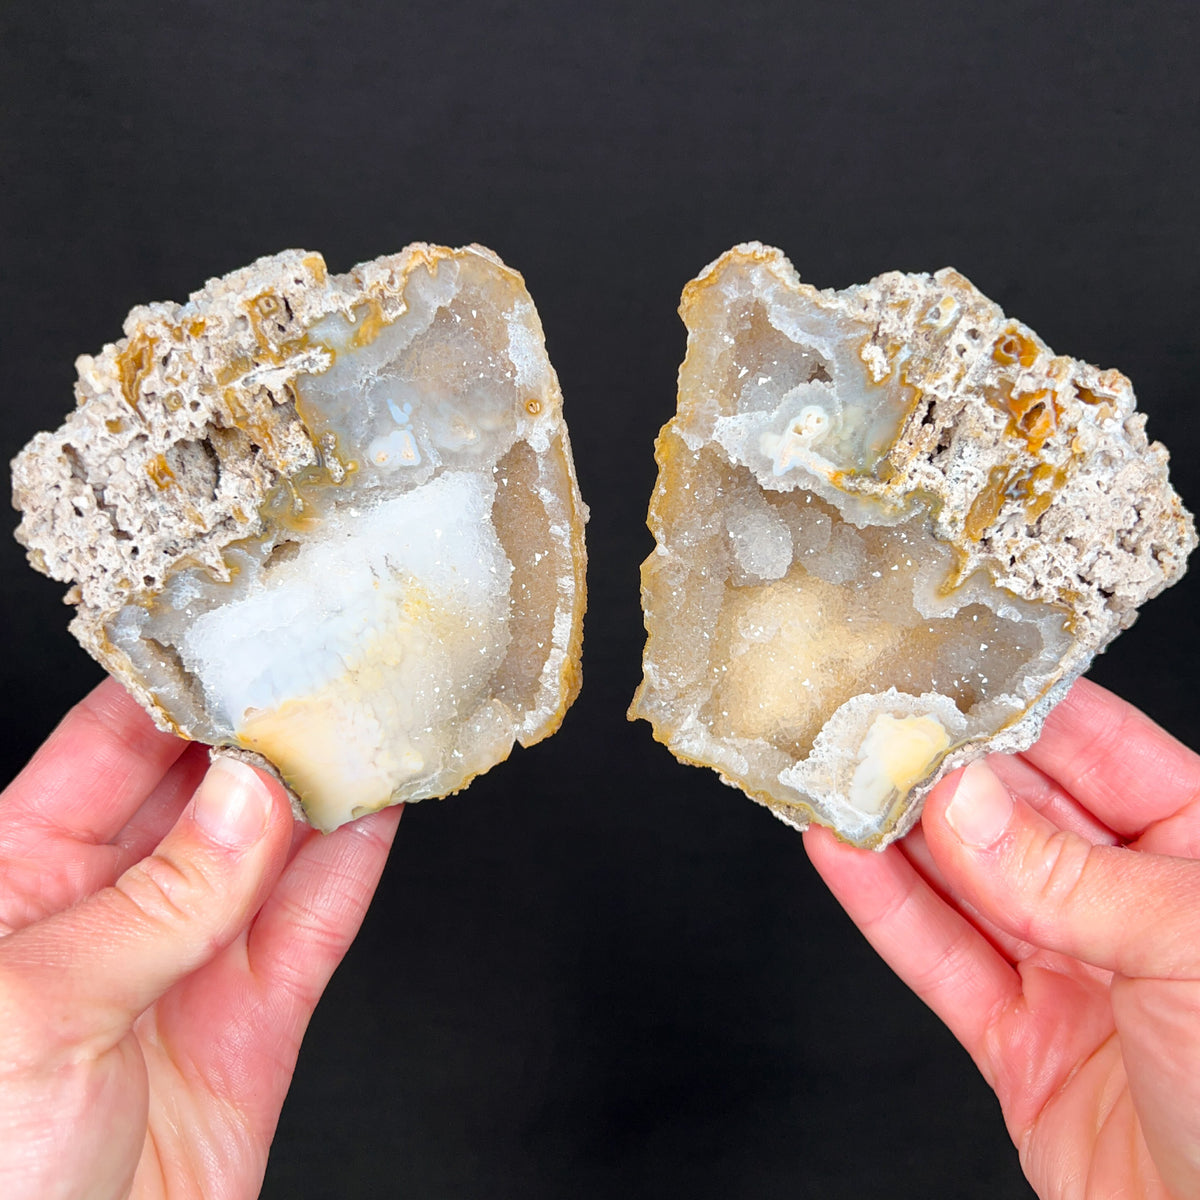 Drusy Quartz Crystals inside Fossilized Coral from Florida